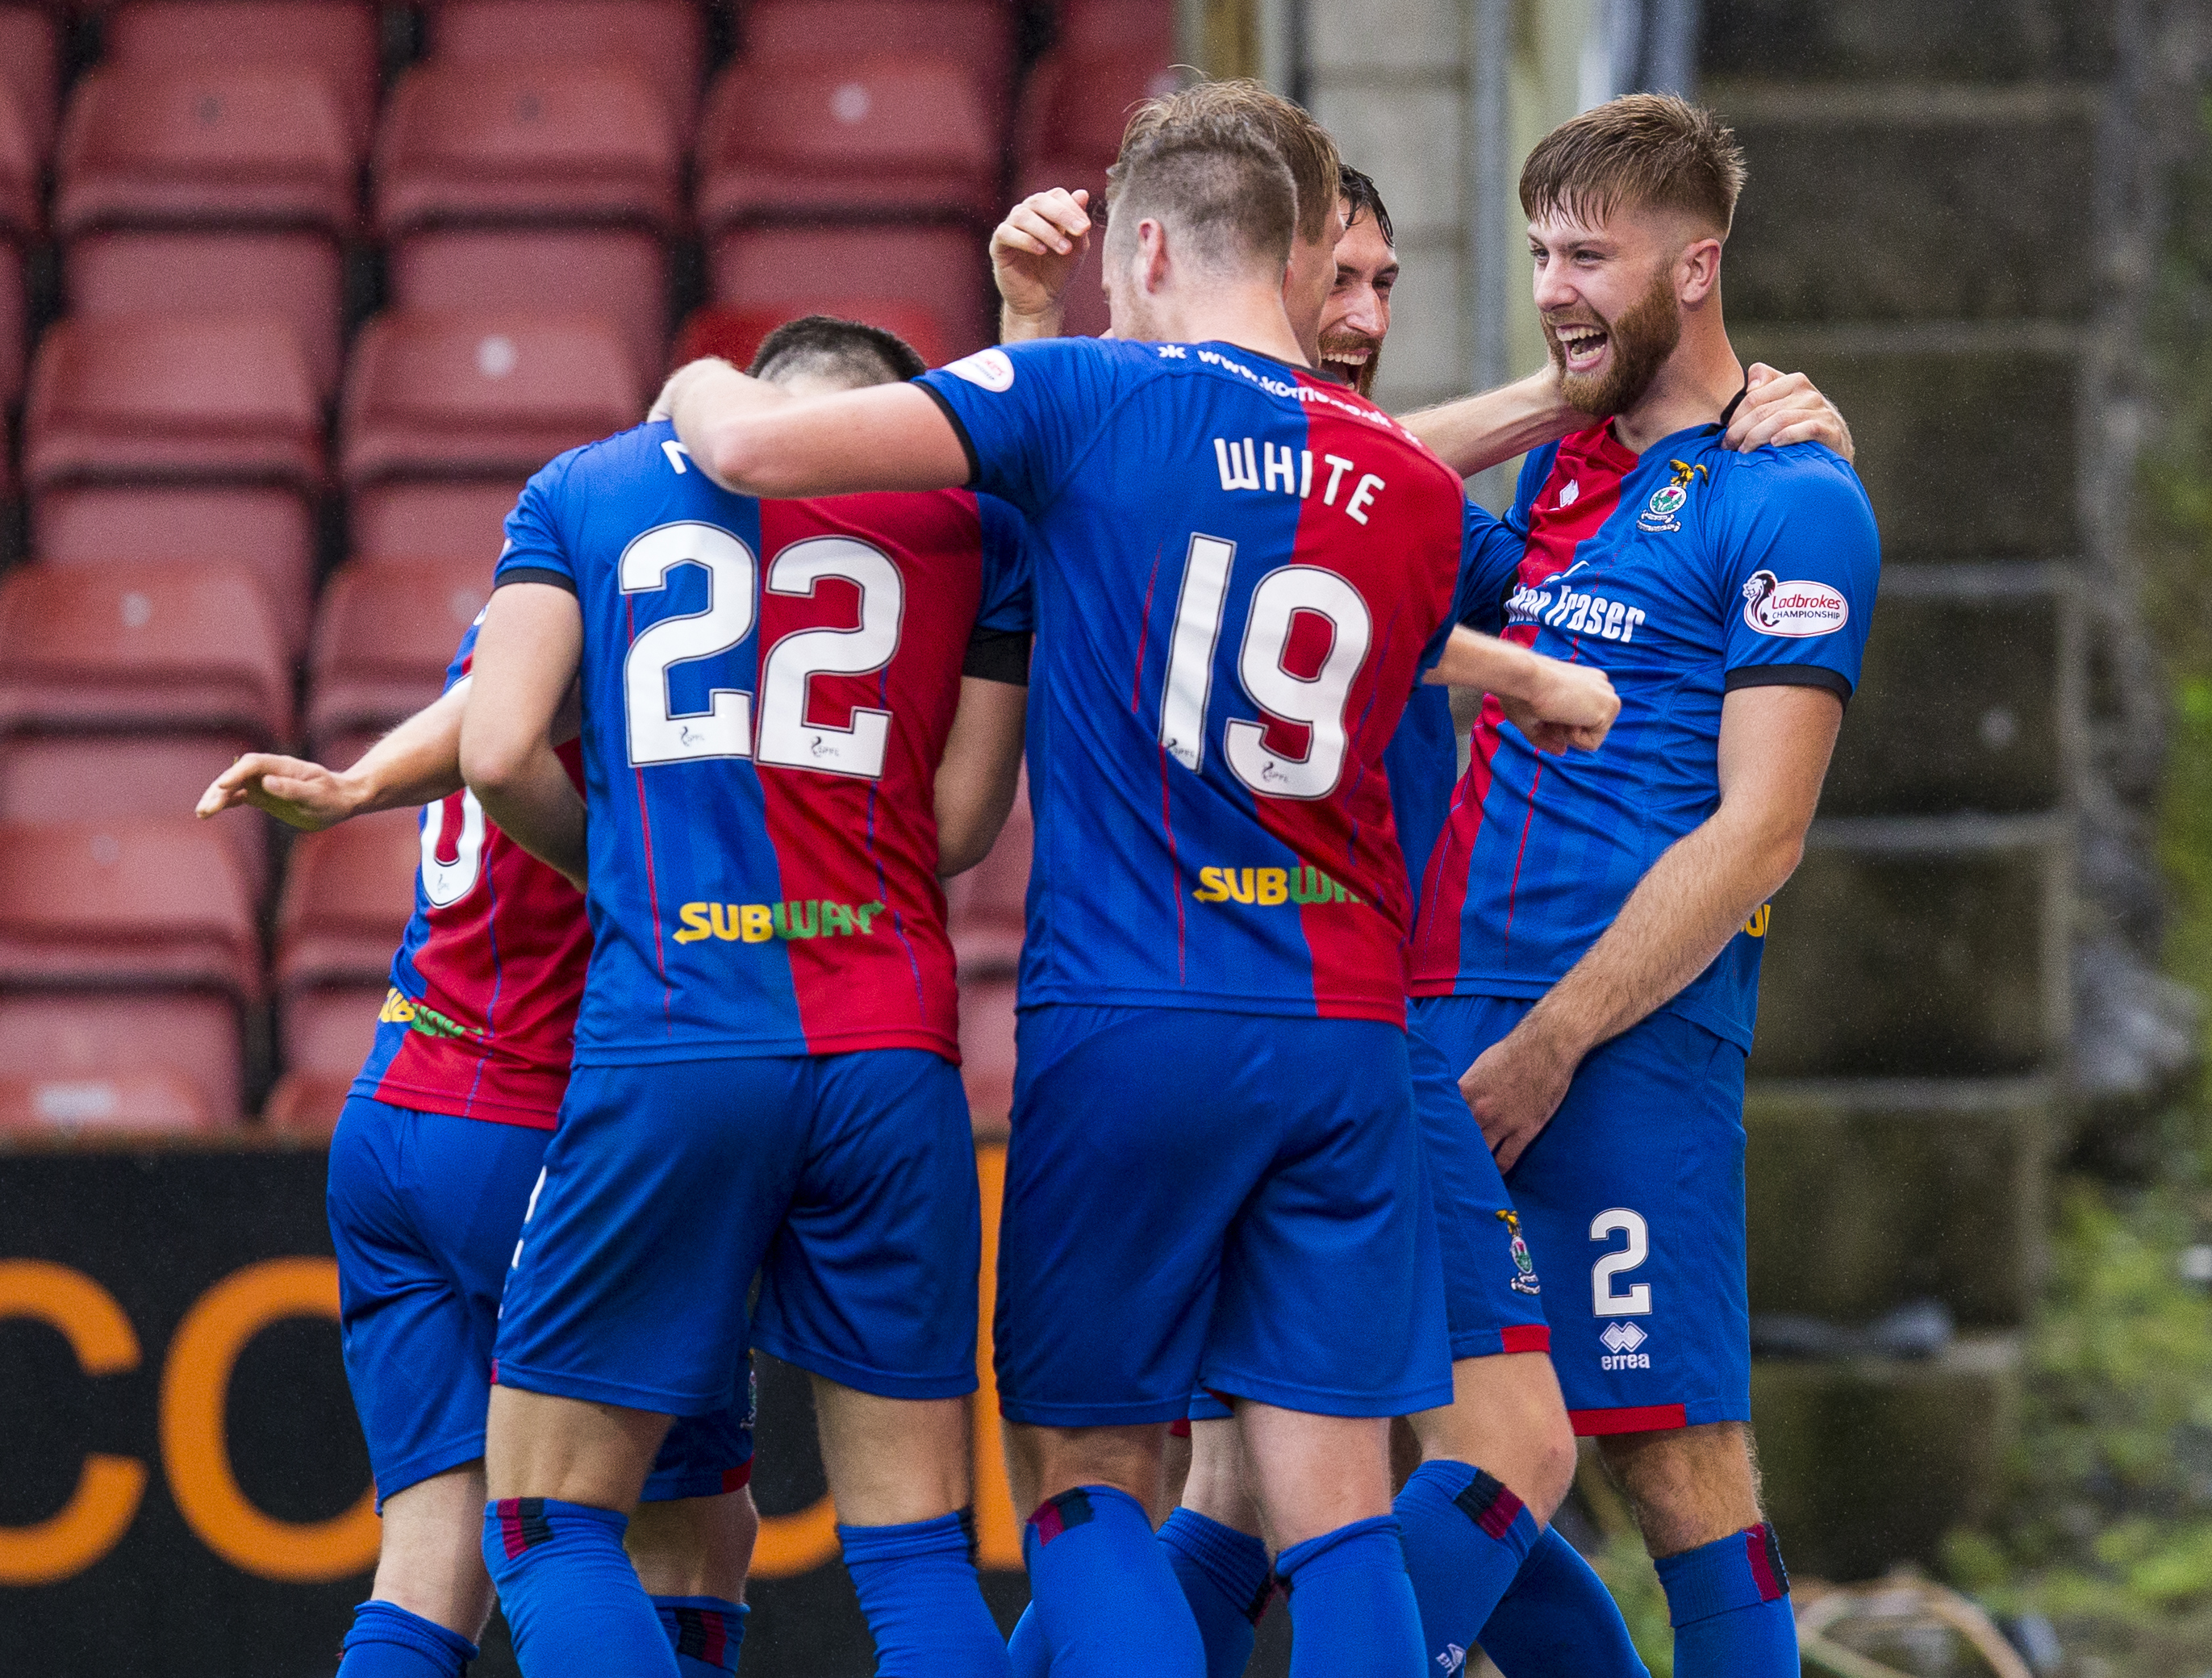 Shaun Rooney scored his first goal for Caley Thistle.